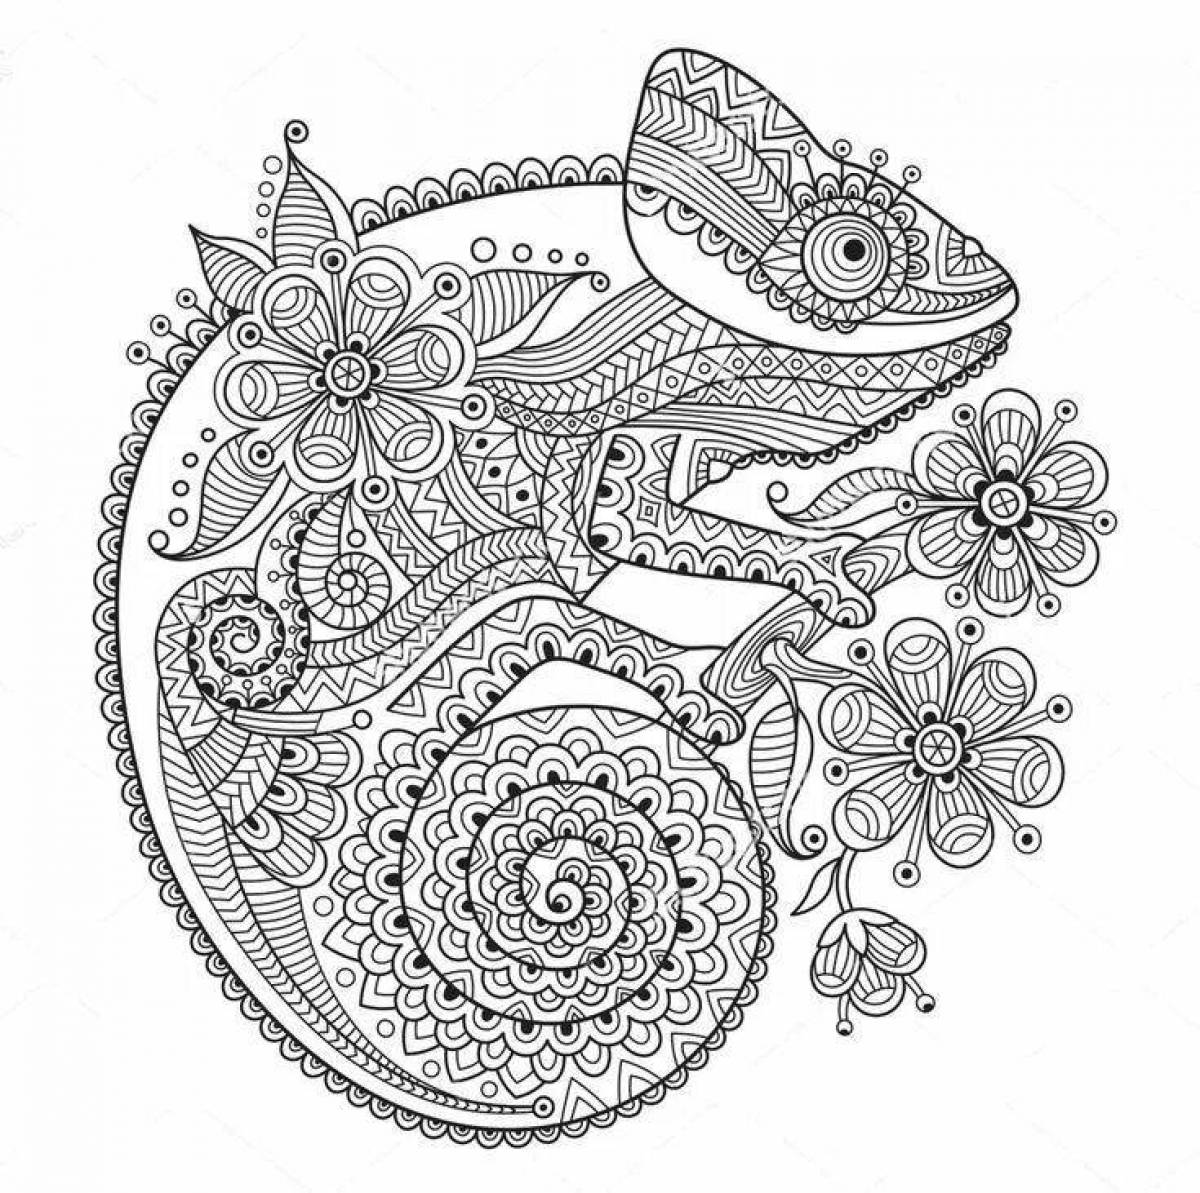 Adorable antistress chameleon coloring book